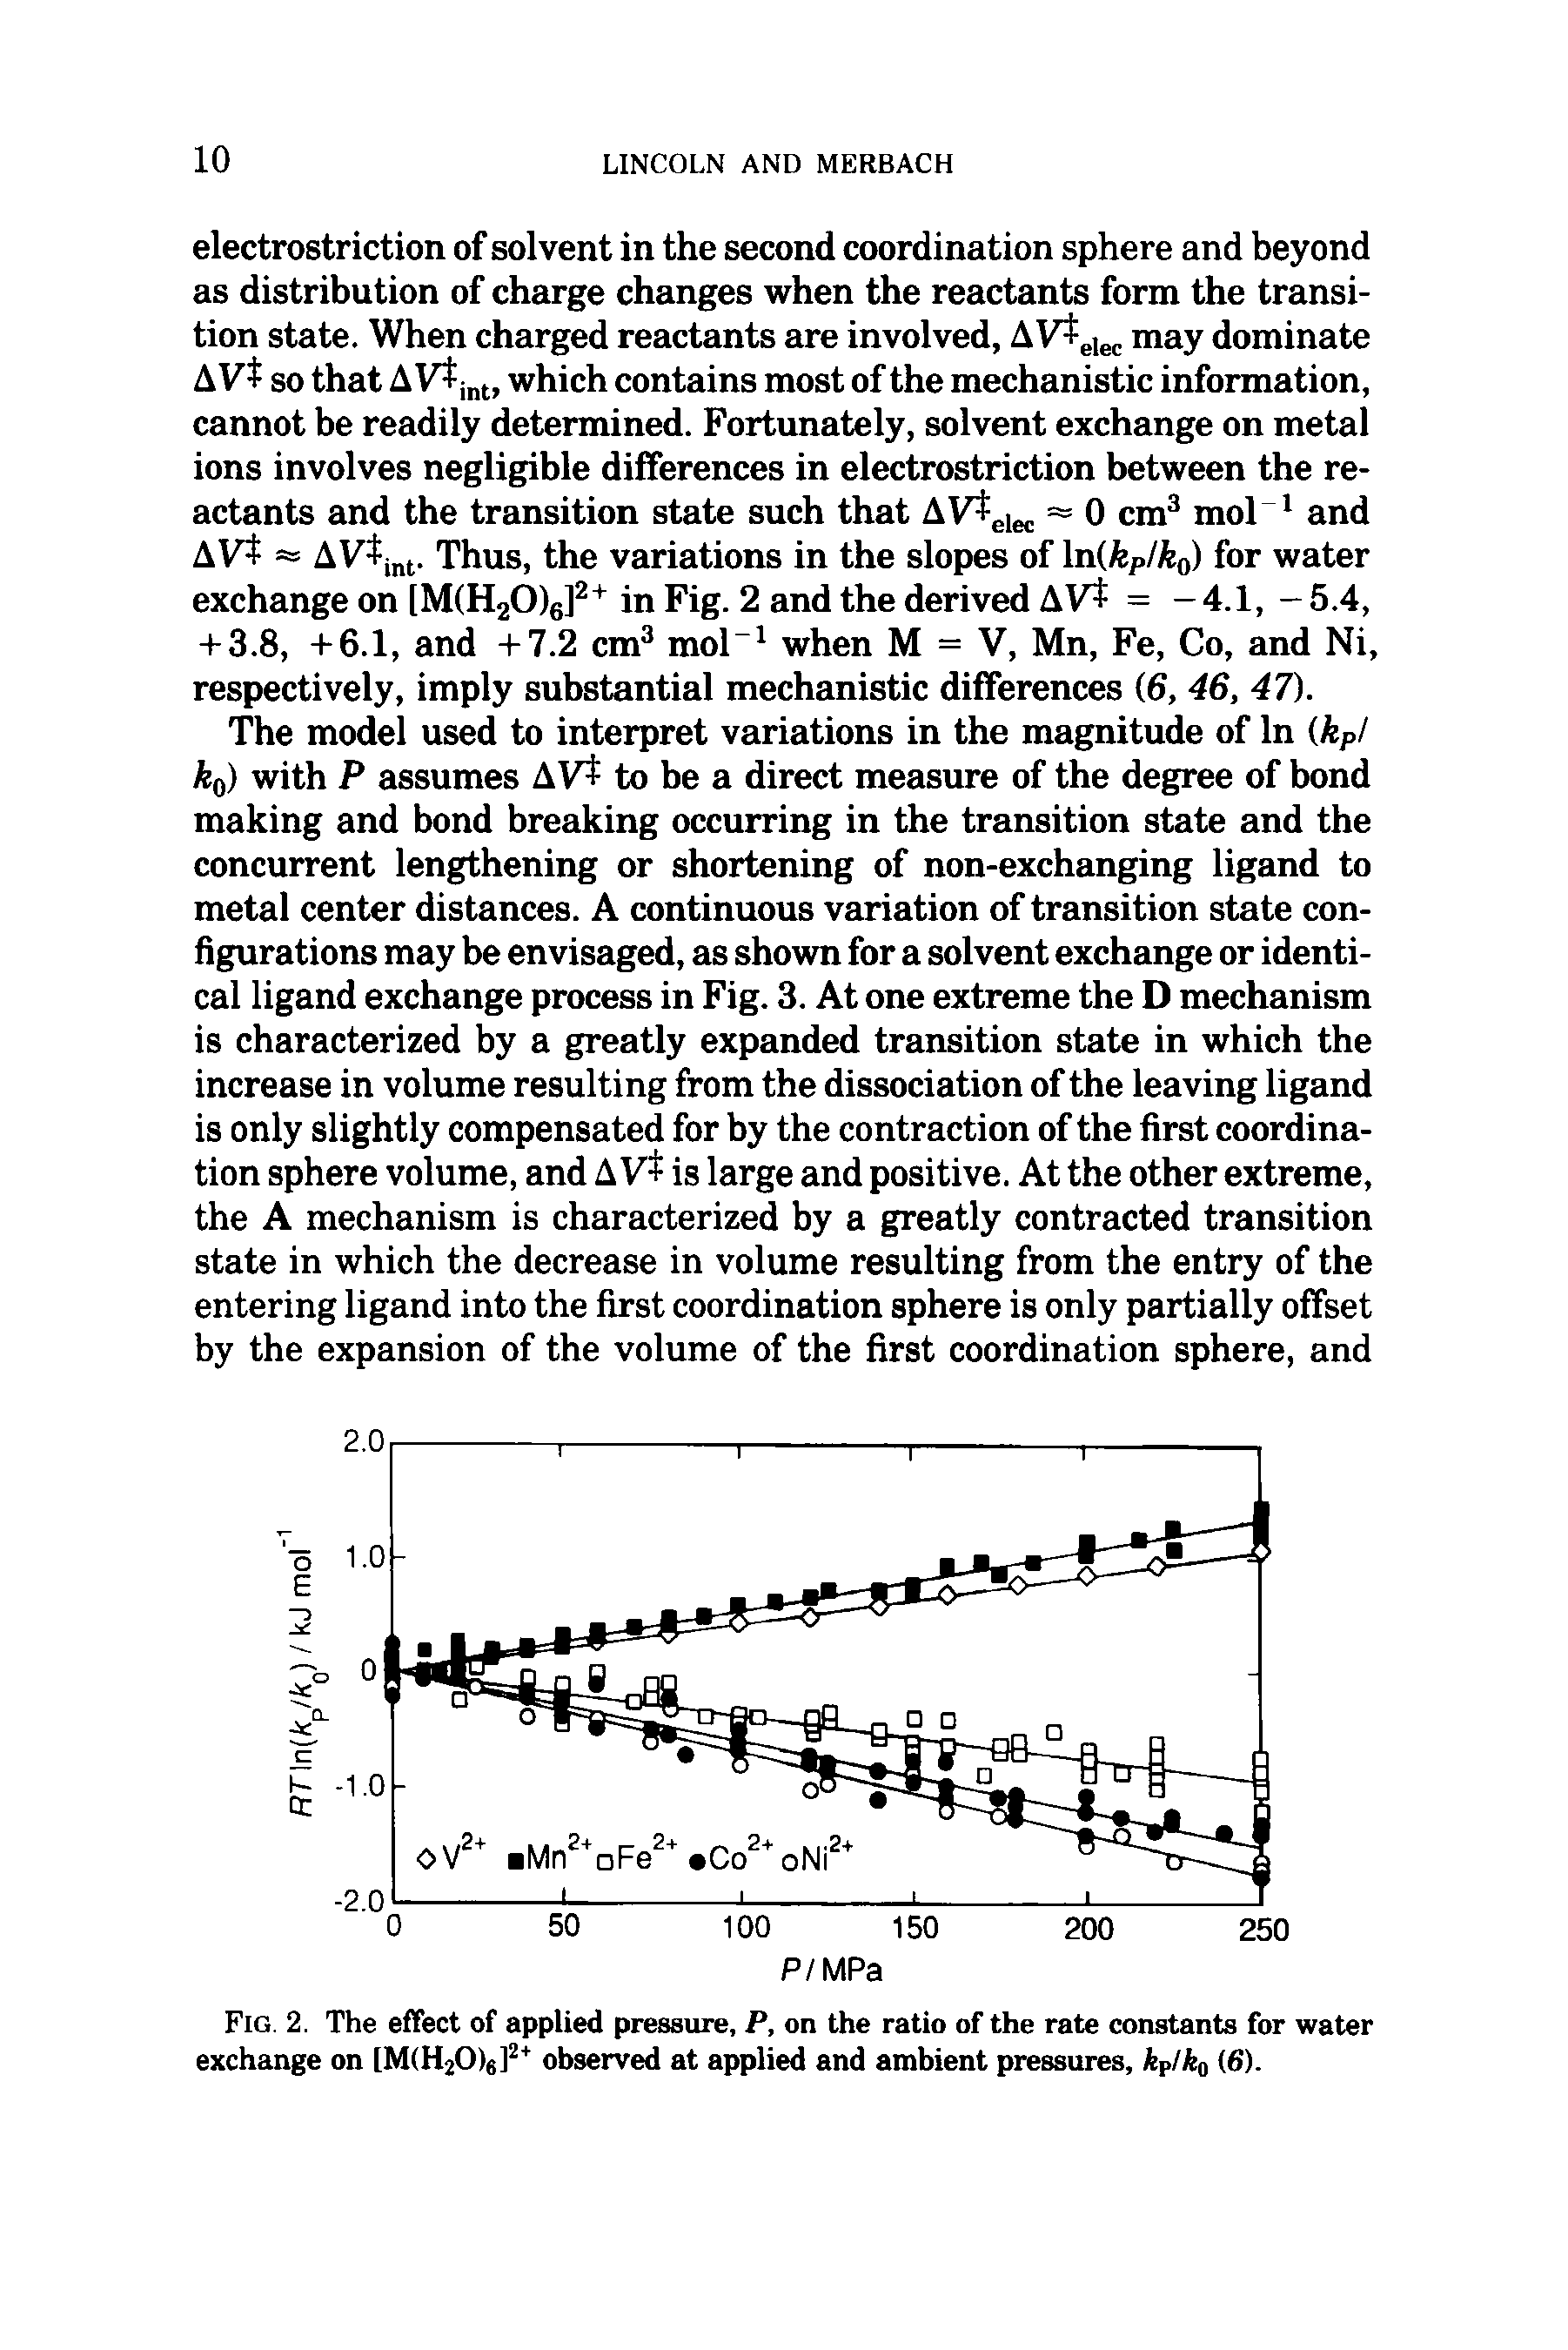 Fig. 2. The effect of applied pressure, P, on the ratio of the rate constants for water exchange on [M(H20)6]2+ observed at applied and ambient pressures, kPlk0 (6).